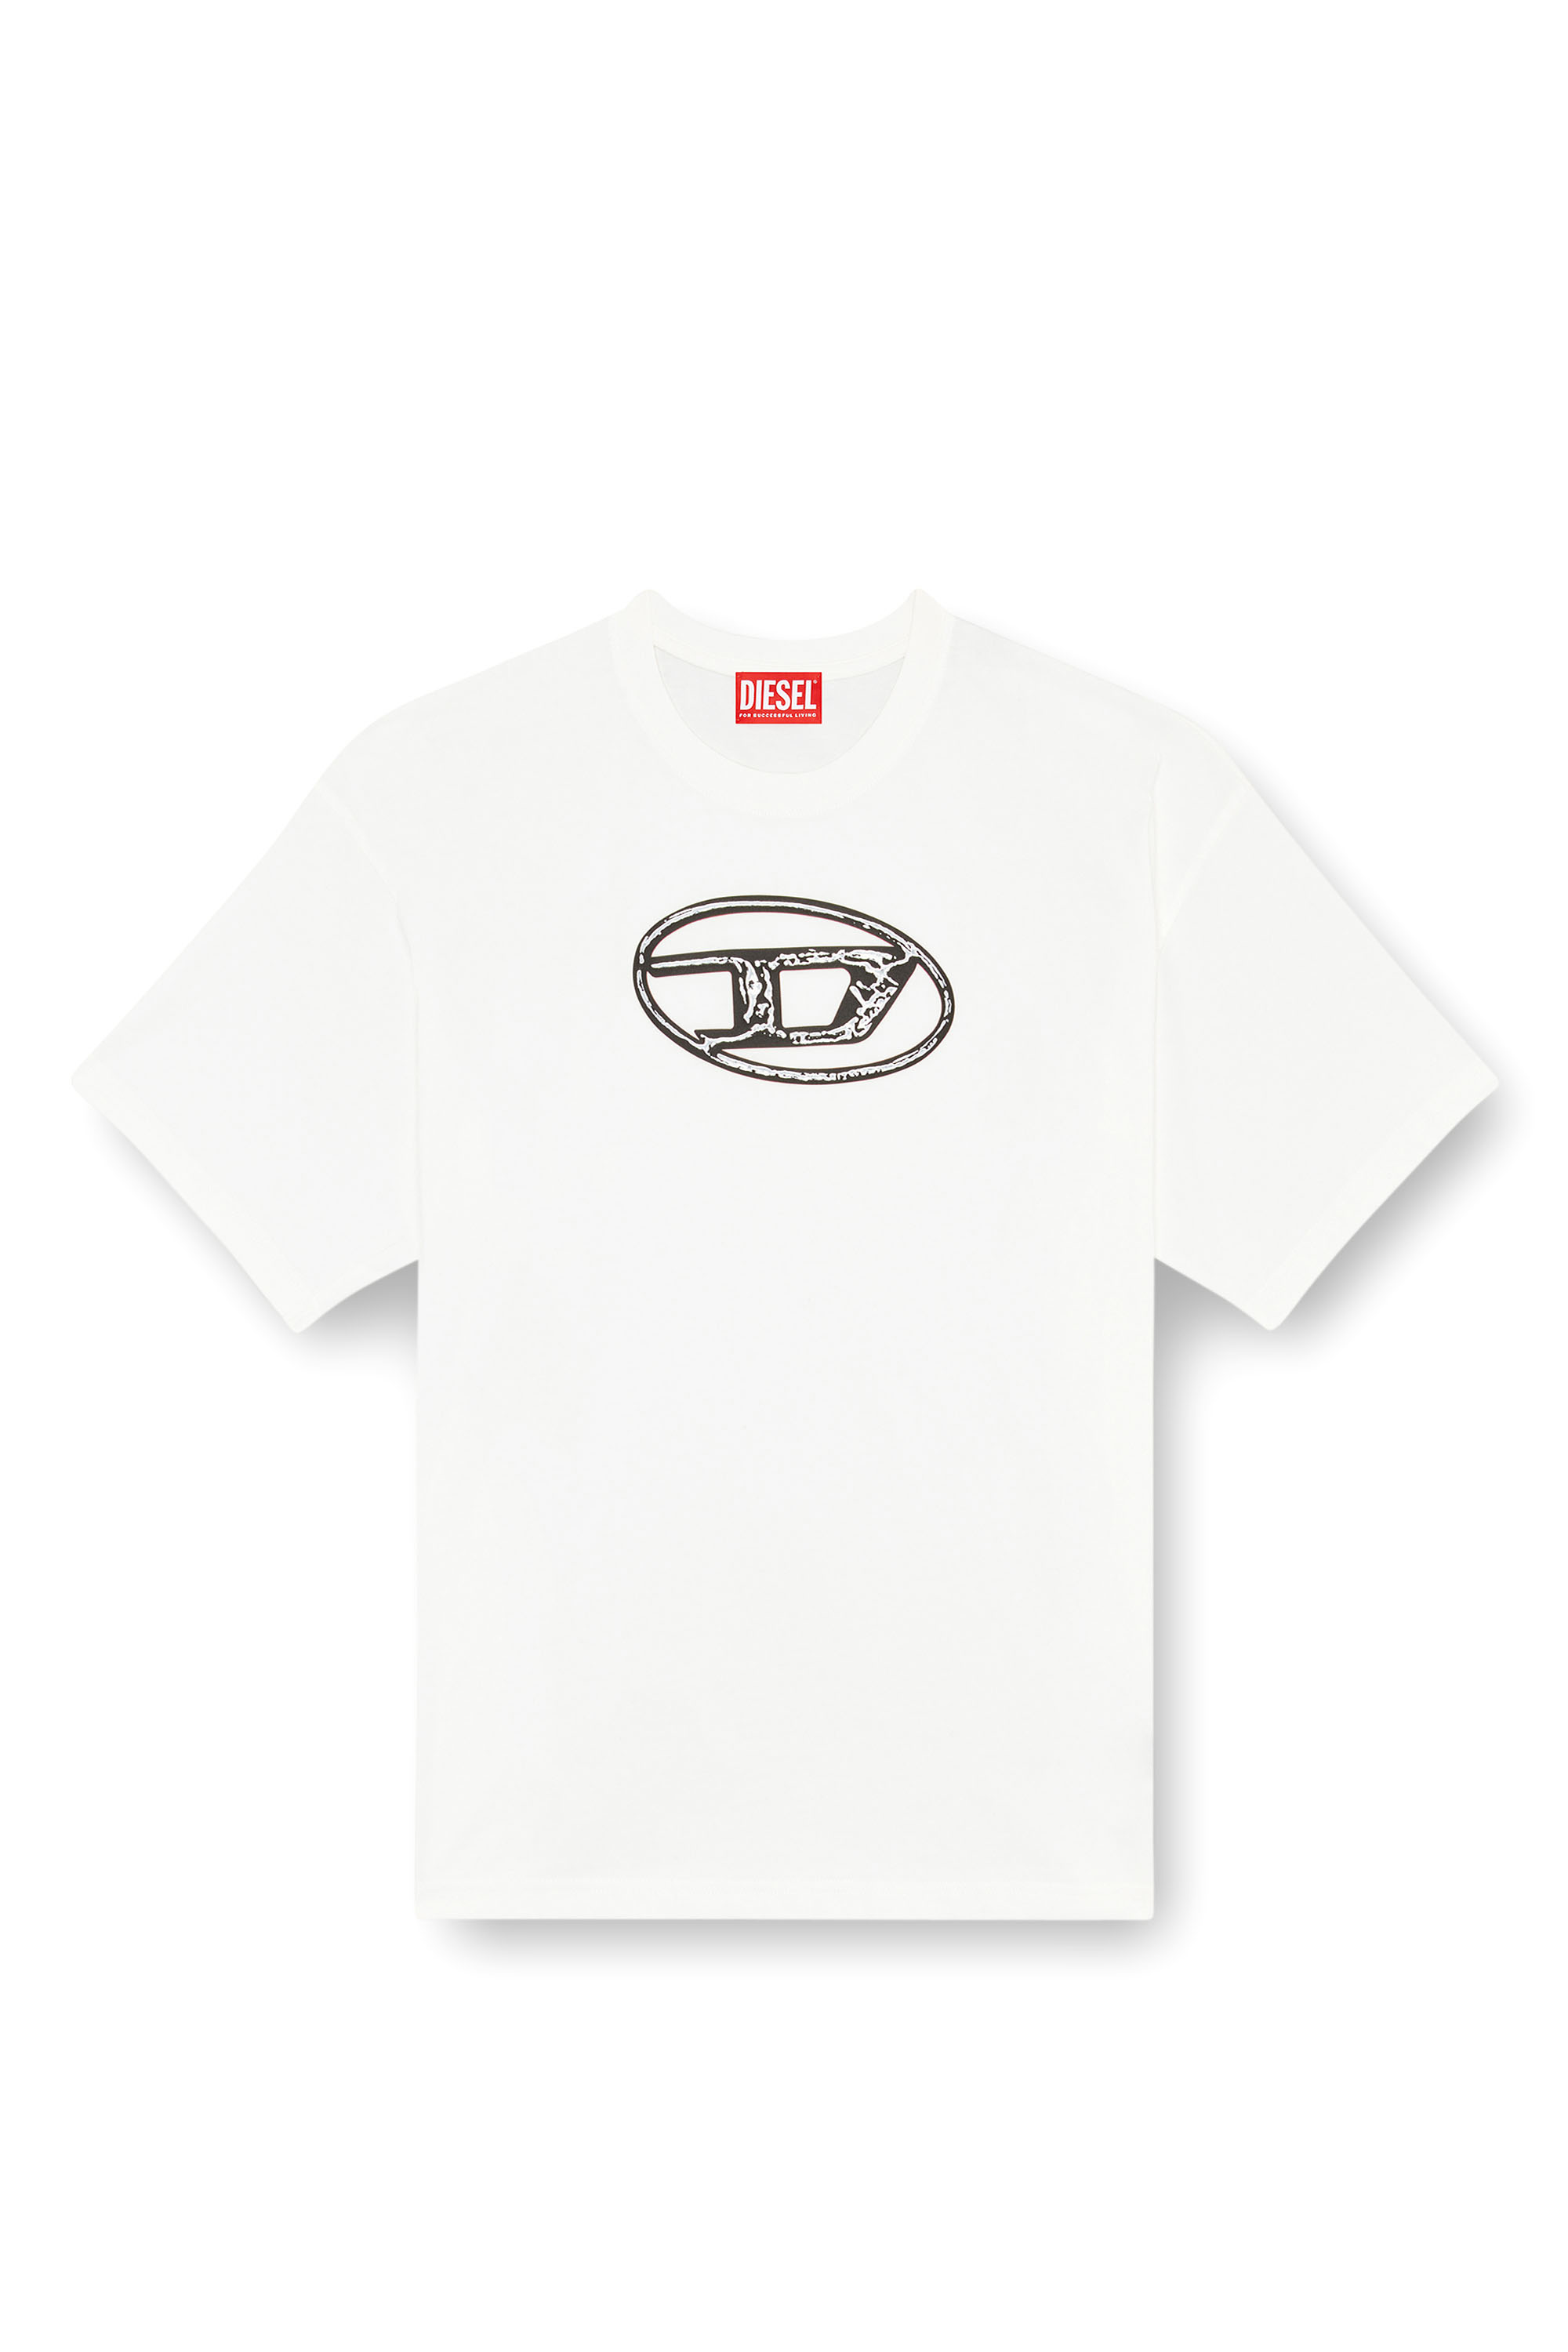 Diesel - T-BOXT-Q22, Man Faded T-shirt with Oval D print in White - Image 3